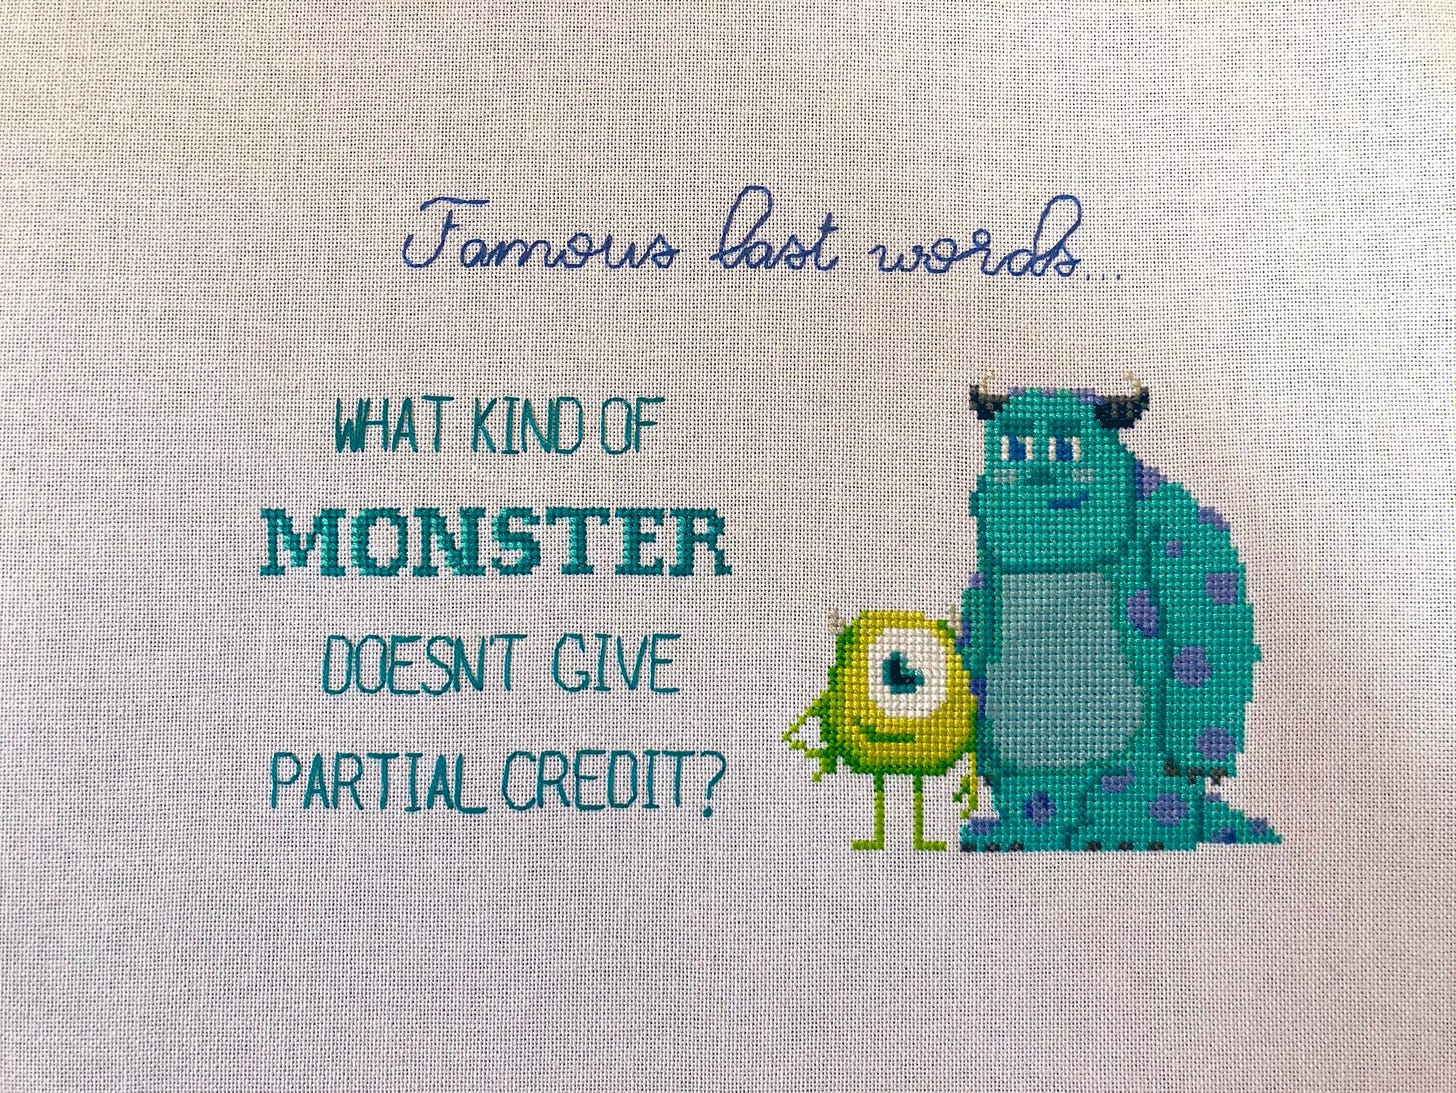 Cross-stitch that says "Famous last words: What kind of monster doesn't give partial credit?"